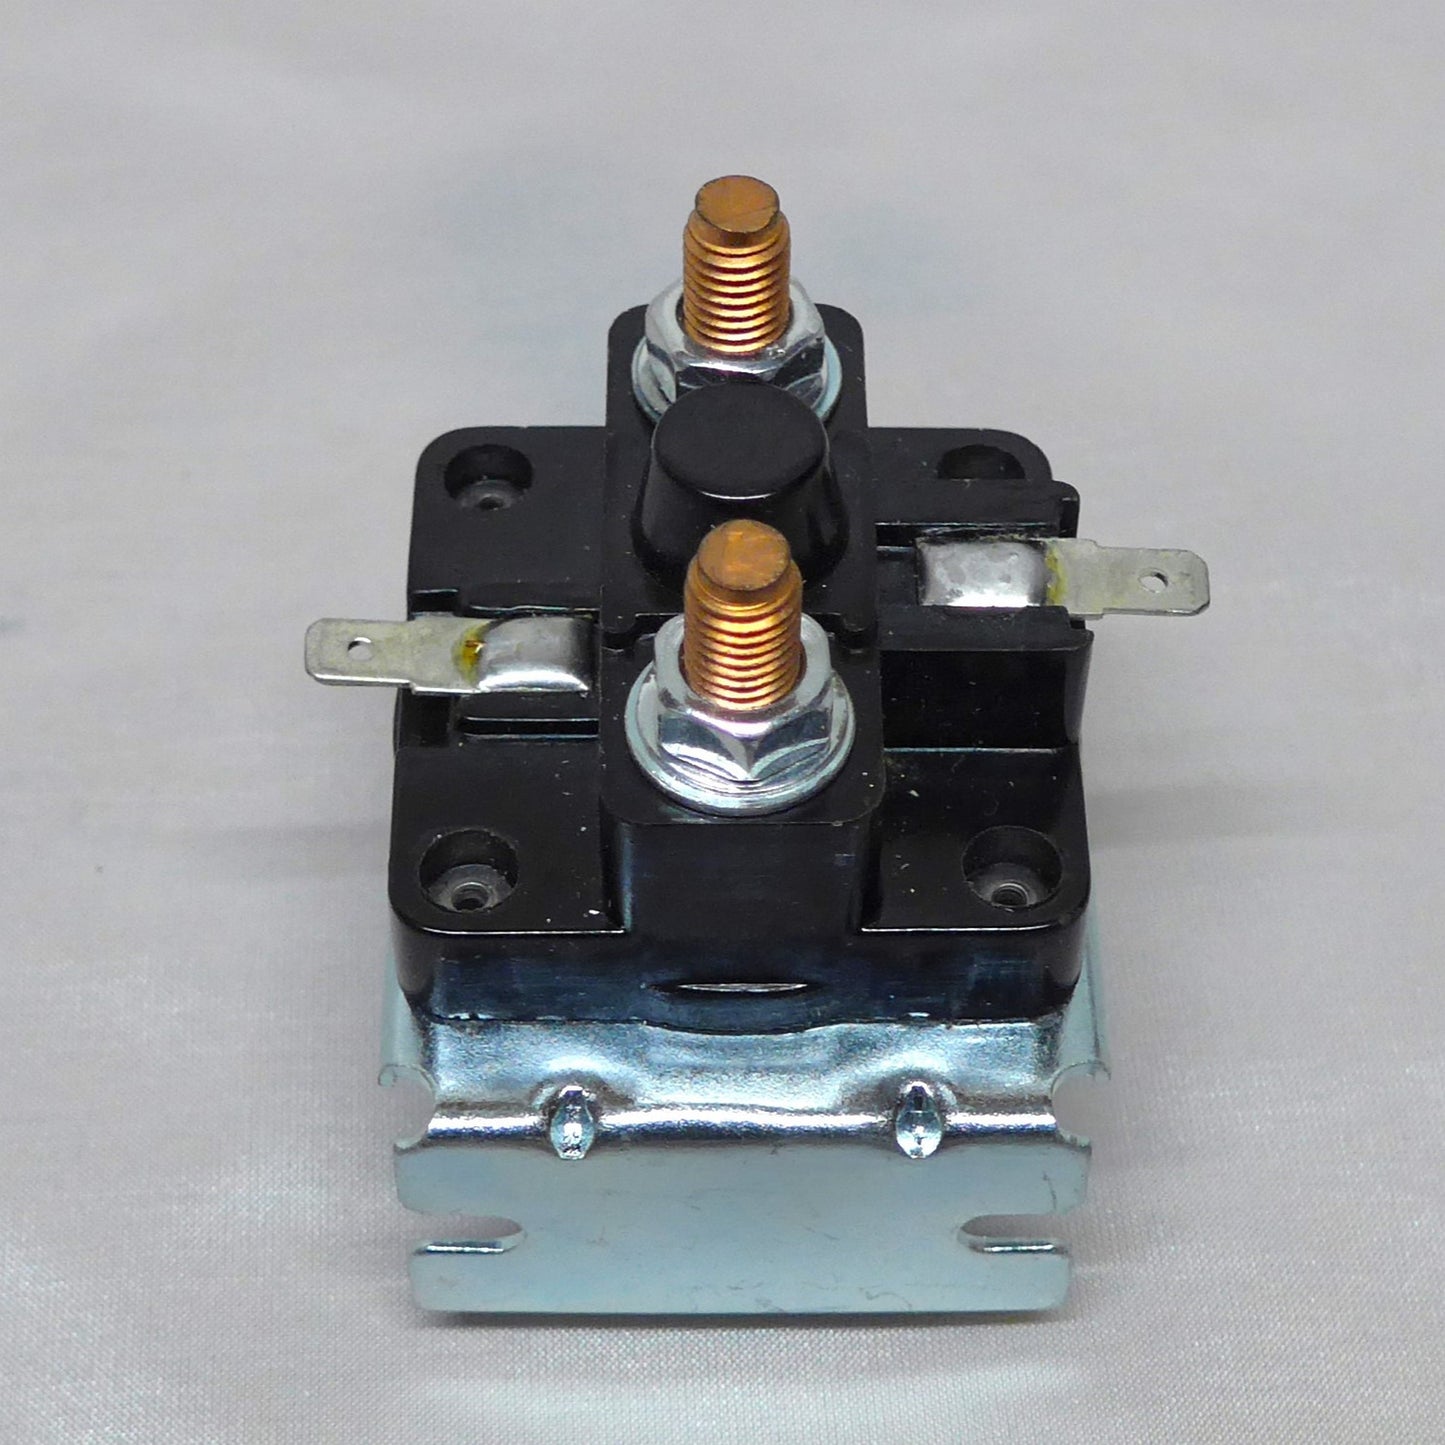 Starter Solenoid - Not Earthed Body